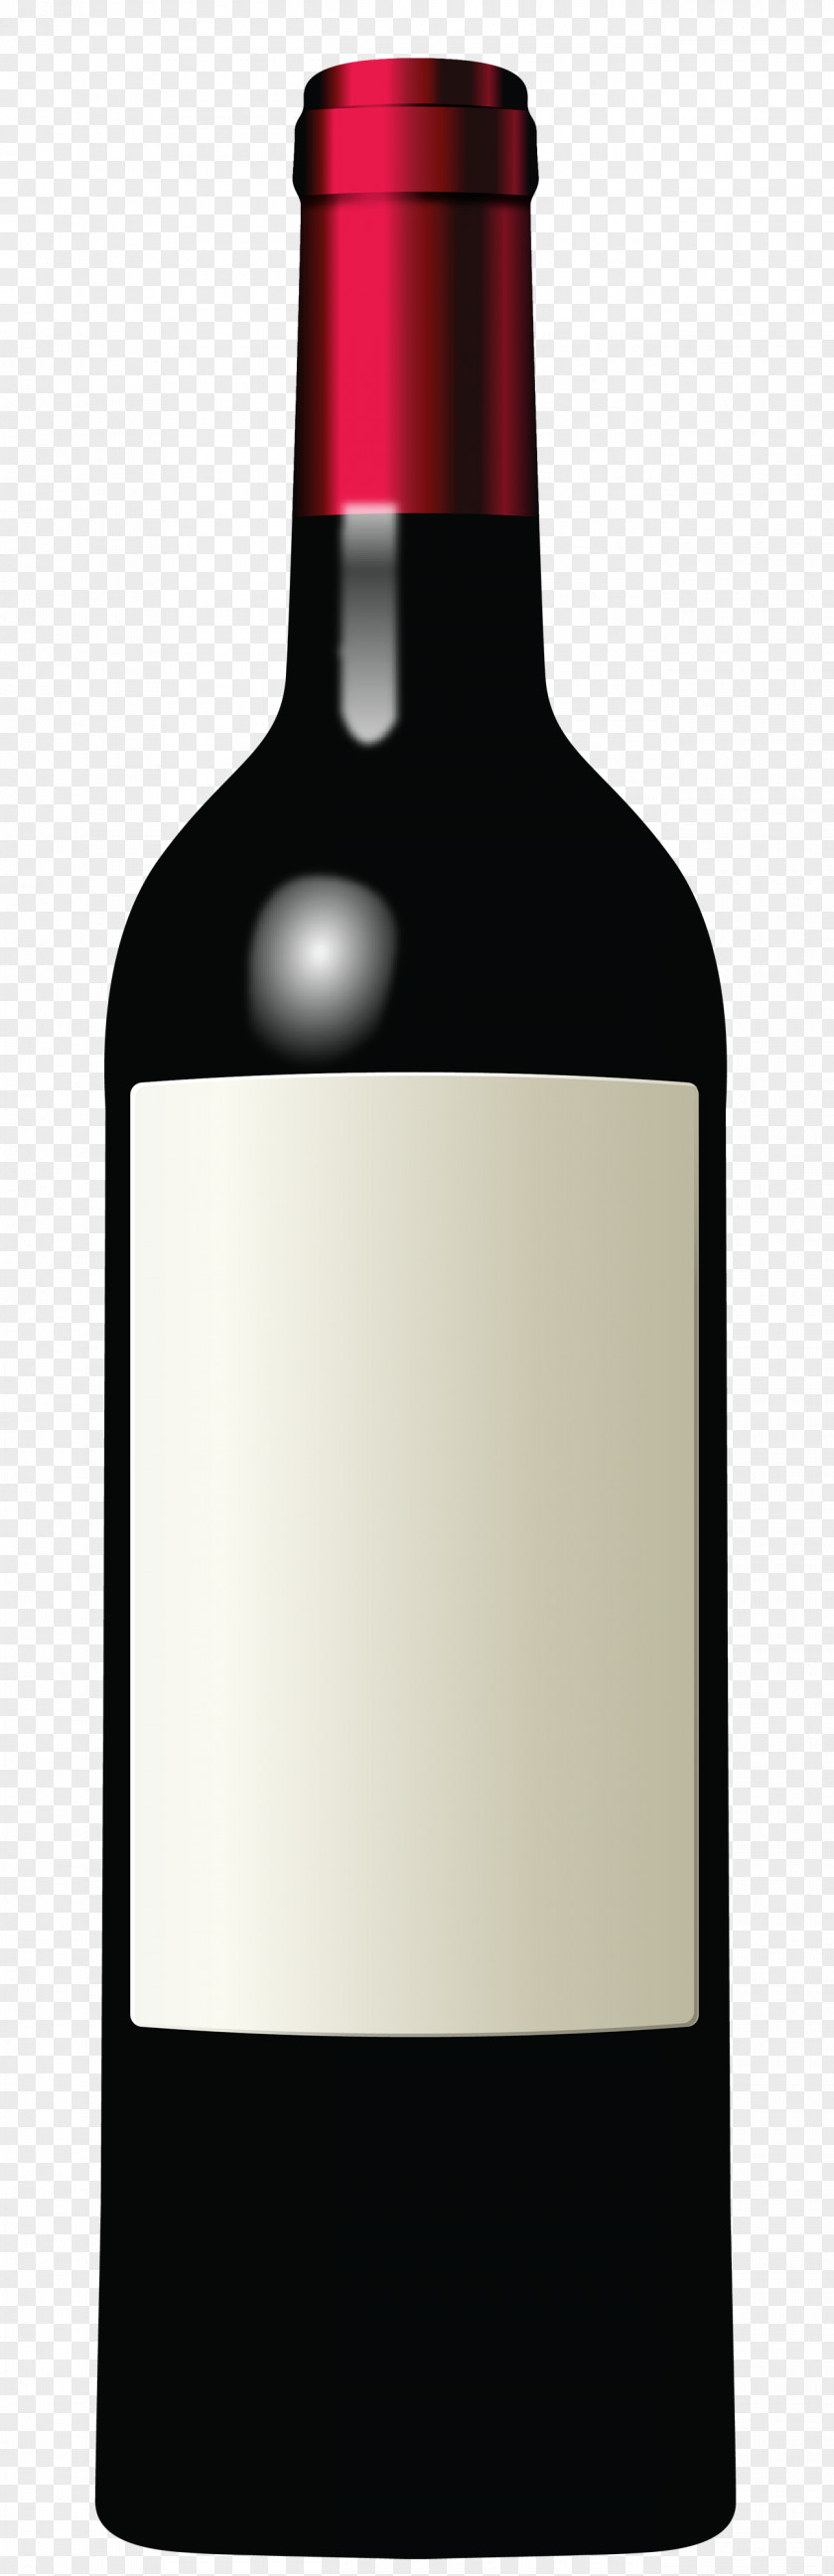 Bottle 7 Red Wine Champagne PNG